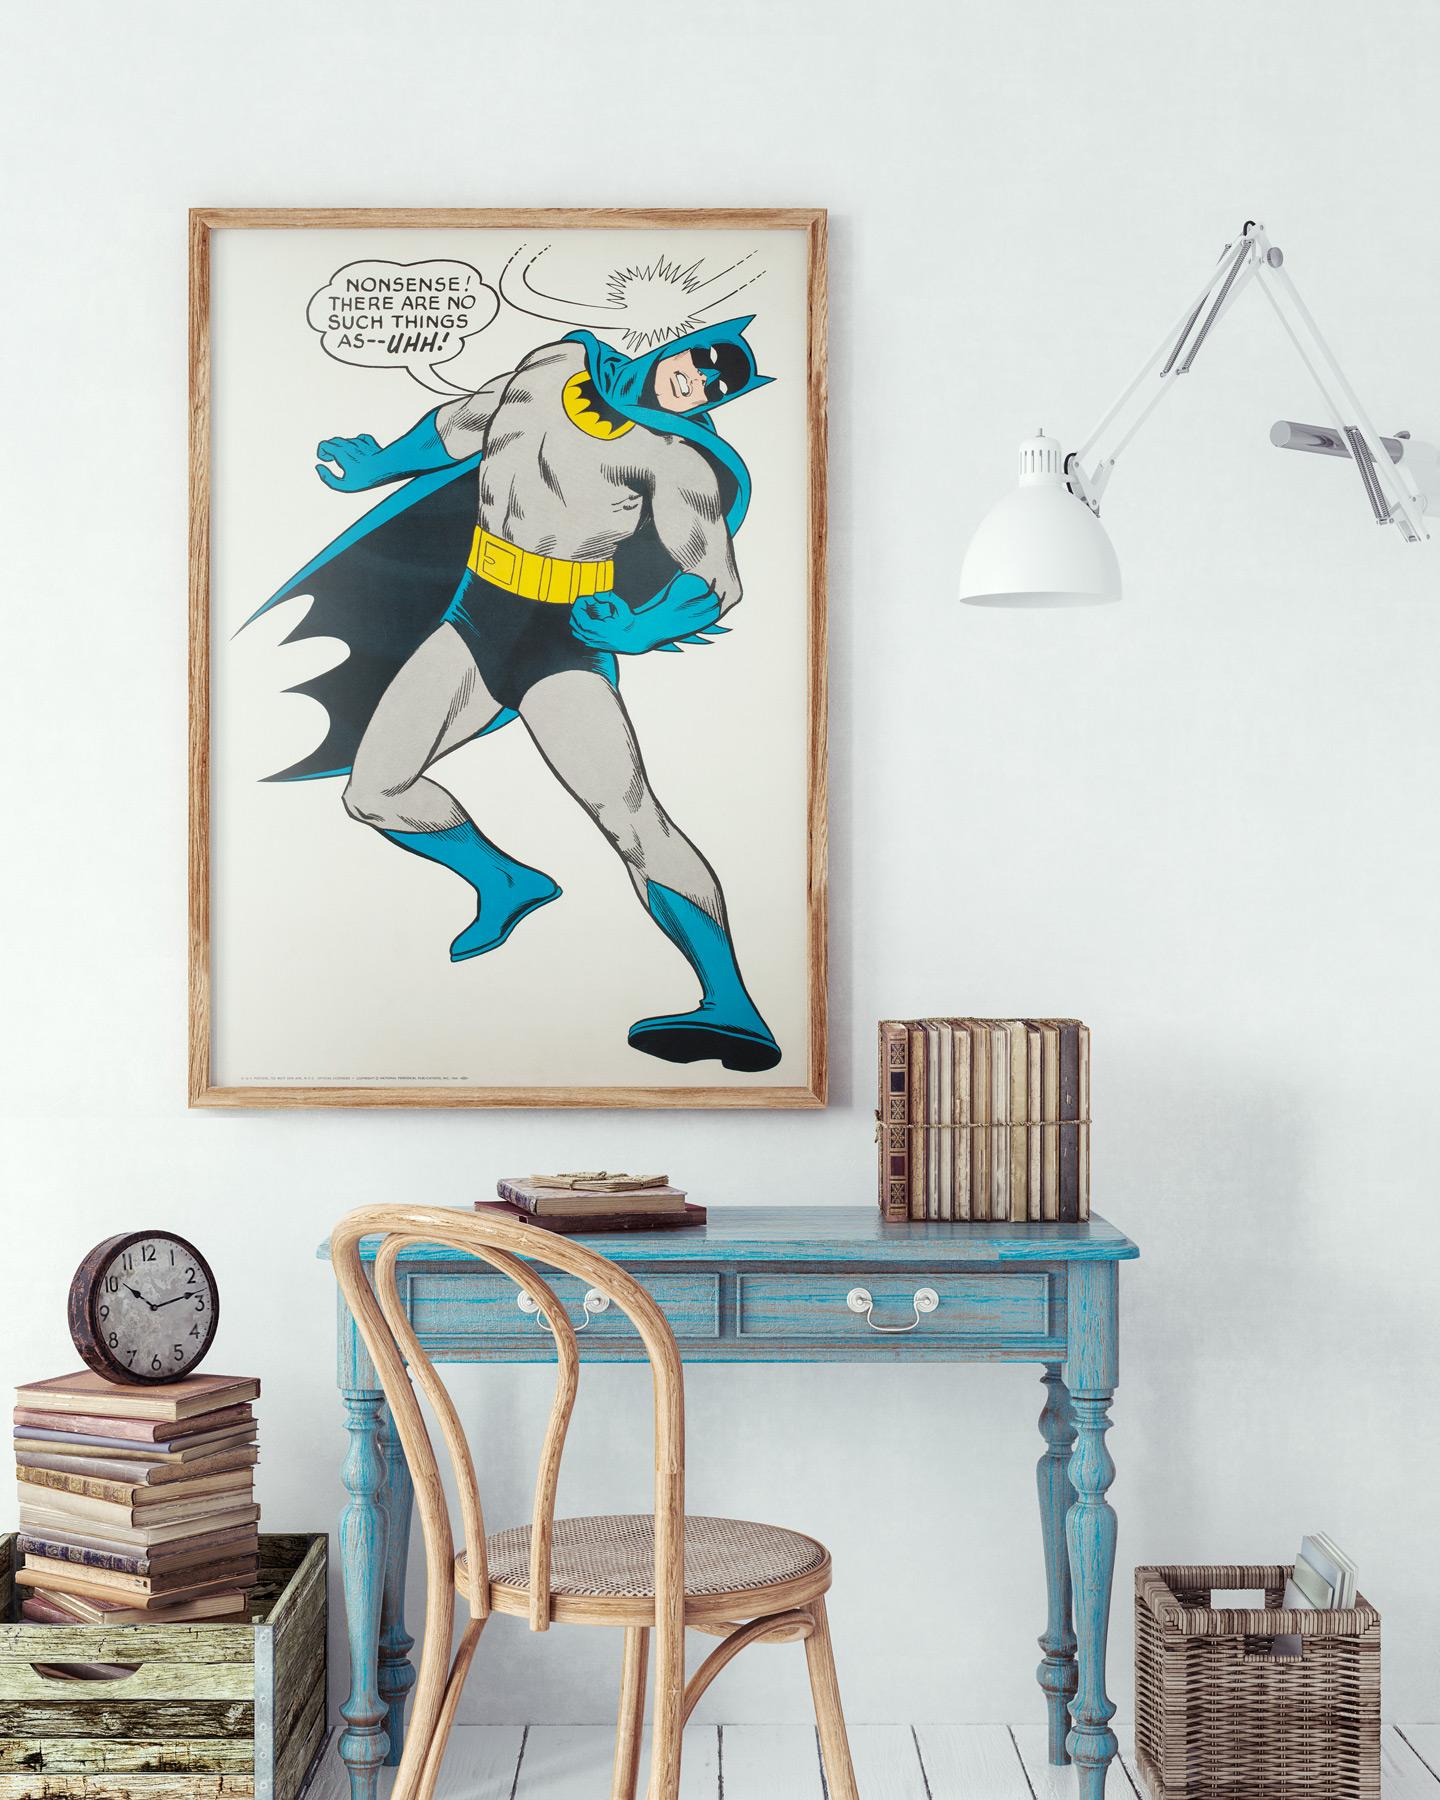 Nonsense! There are no such things as--UHH!

Fabulous original Carmine Infantino 1960s Batman poster - Printed by G & F Posters NYC official licensees Copyright National Periodical Publications Inc 1966. We think that notable comic artist